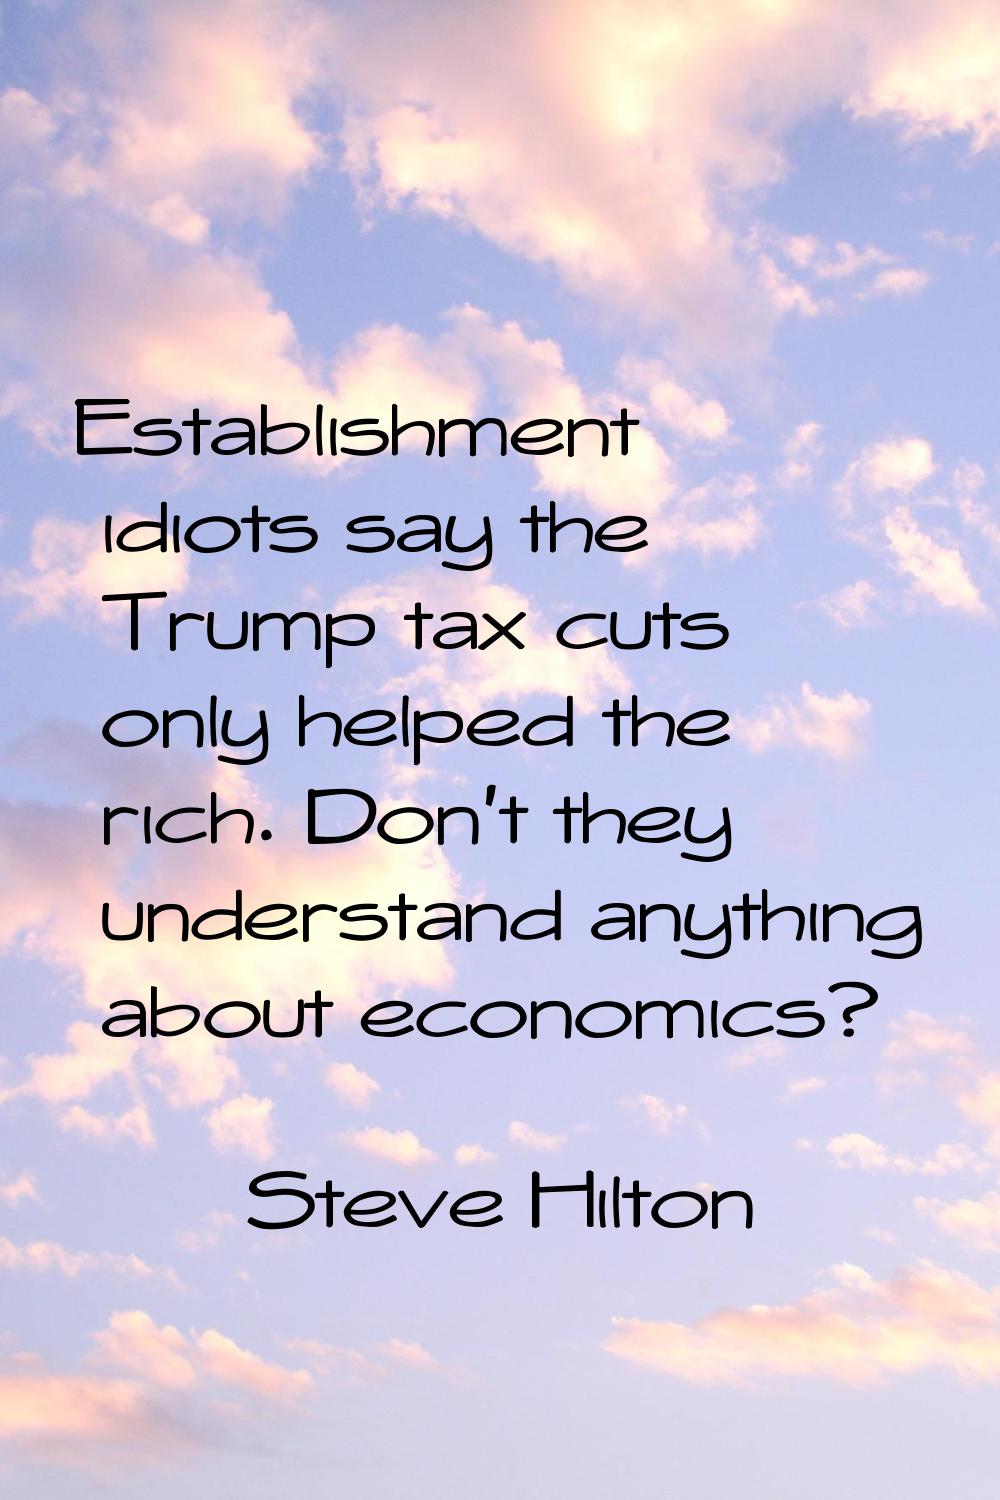 Establishment idiots say the Trump tax cuts only helped the rich. Don't they understand anything ab